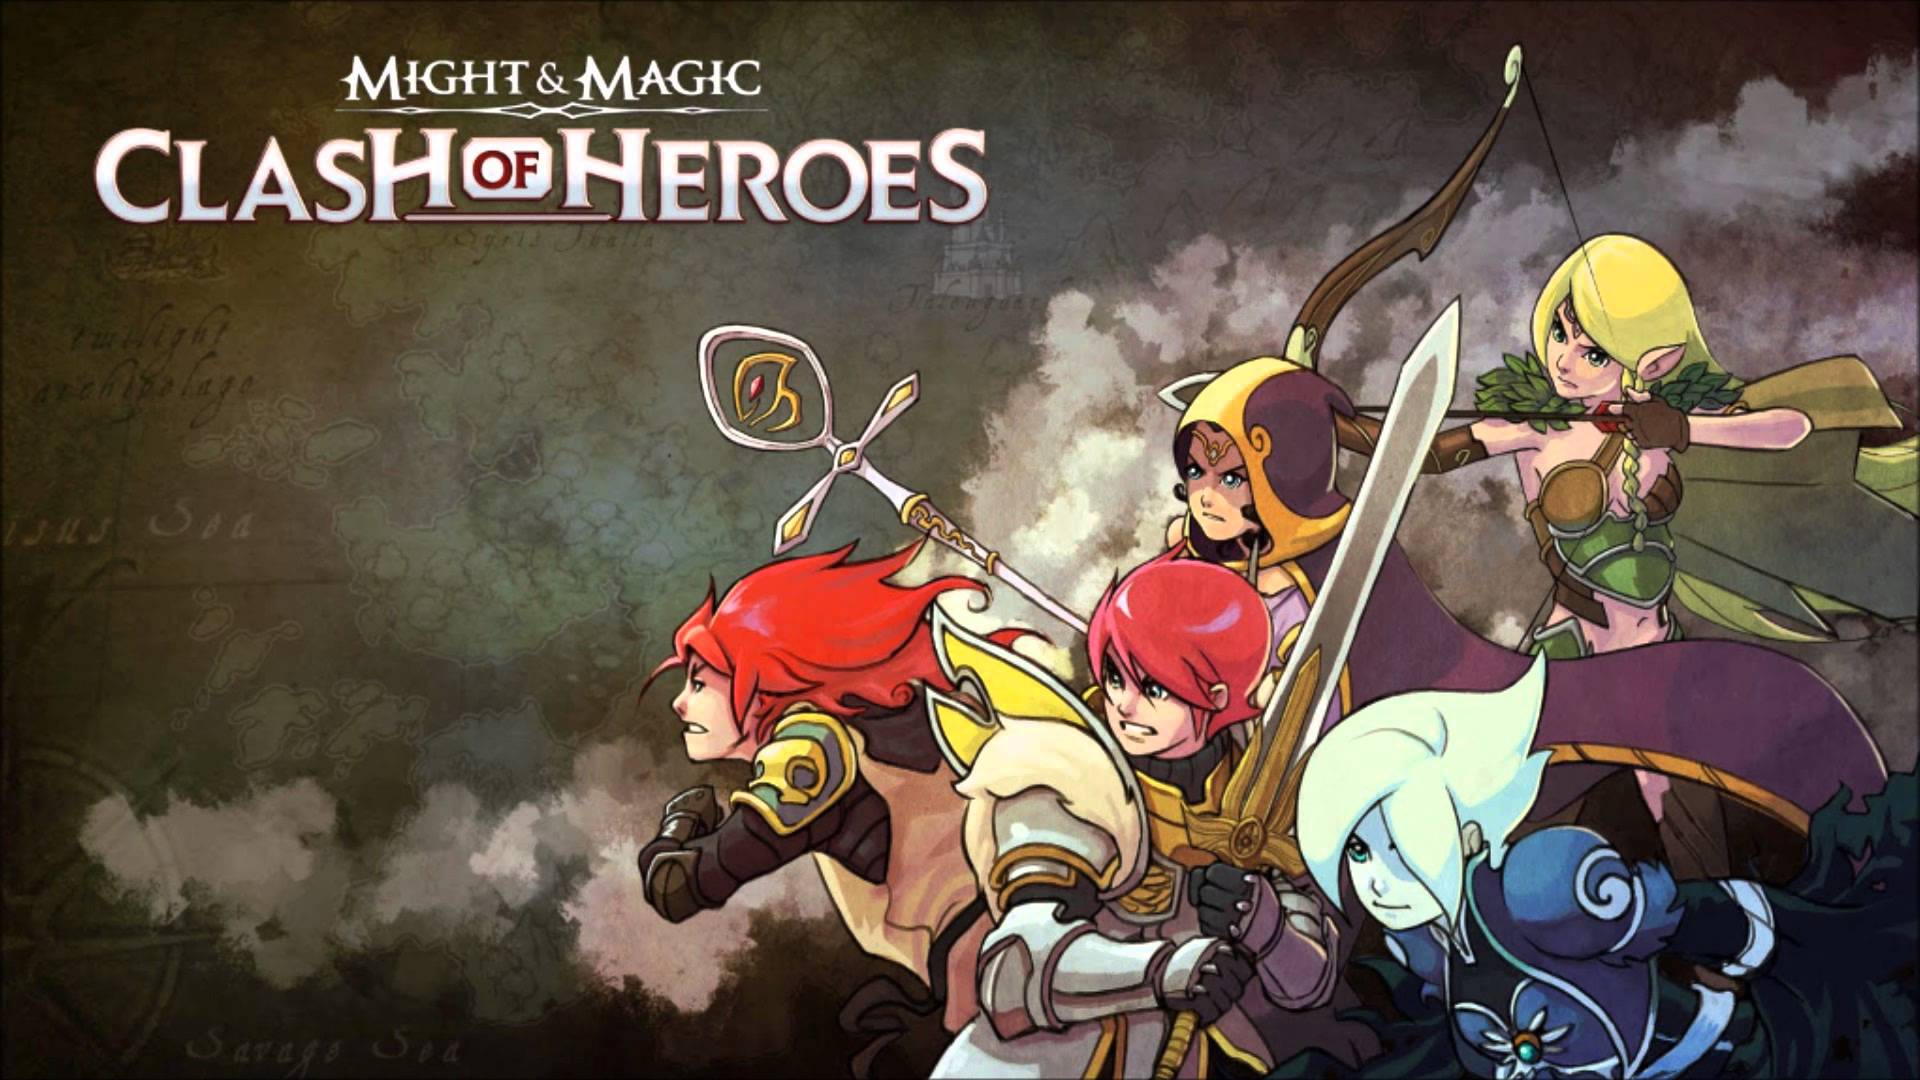 Might & Magic: Clash Of Heroes #27